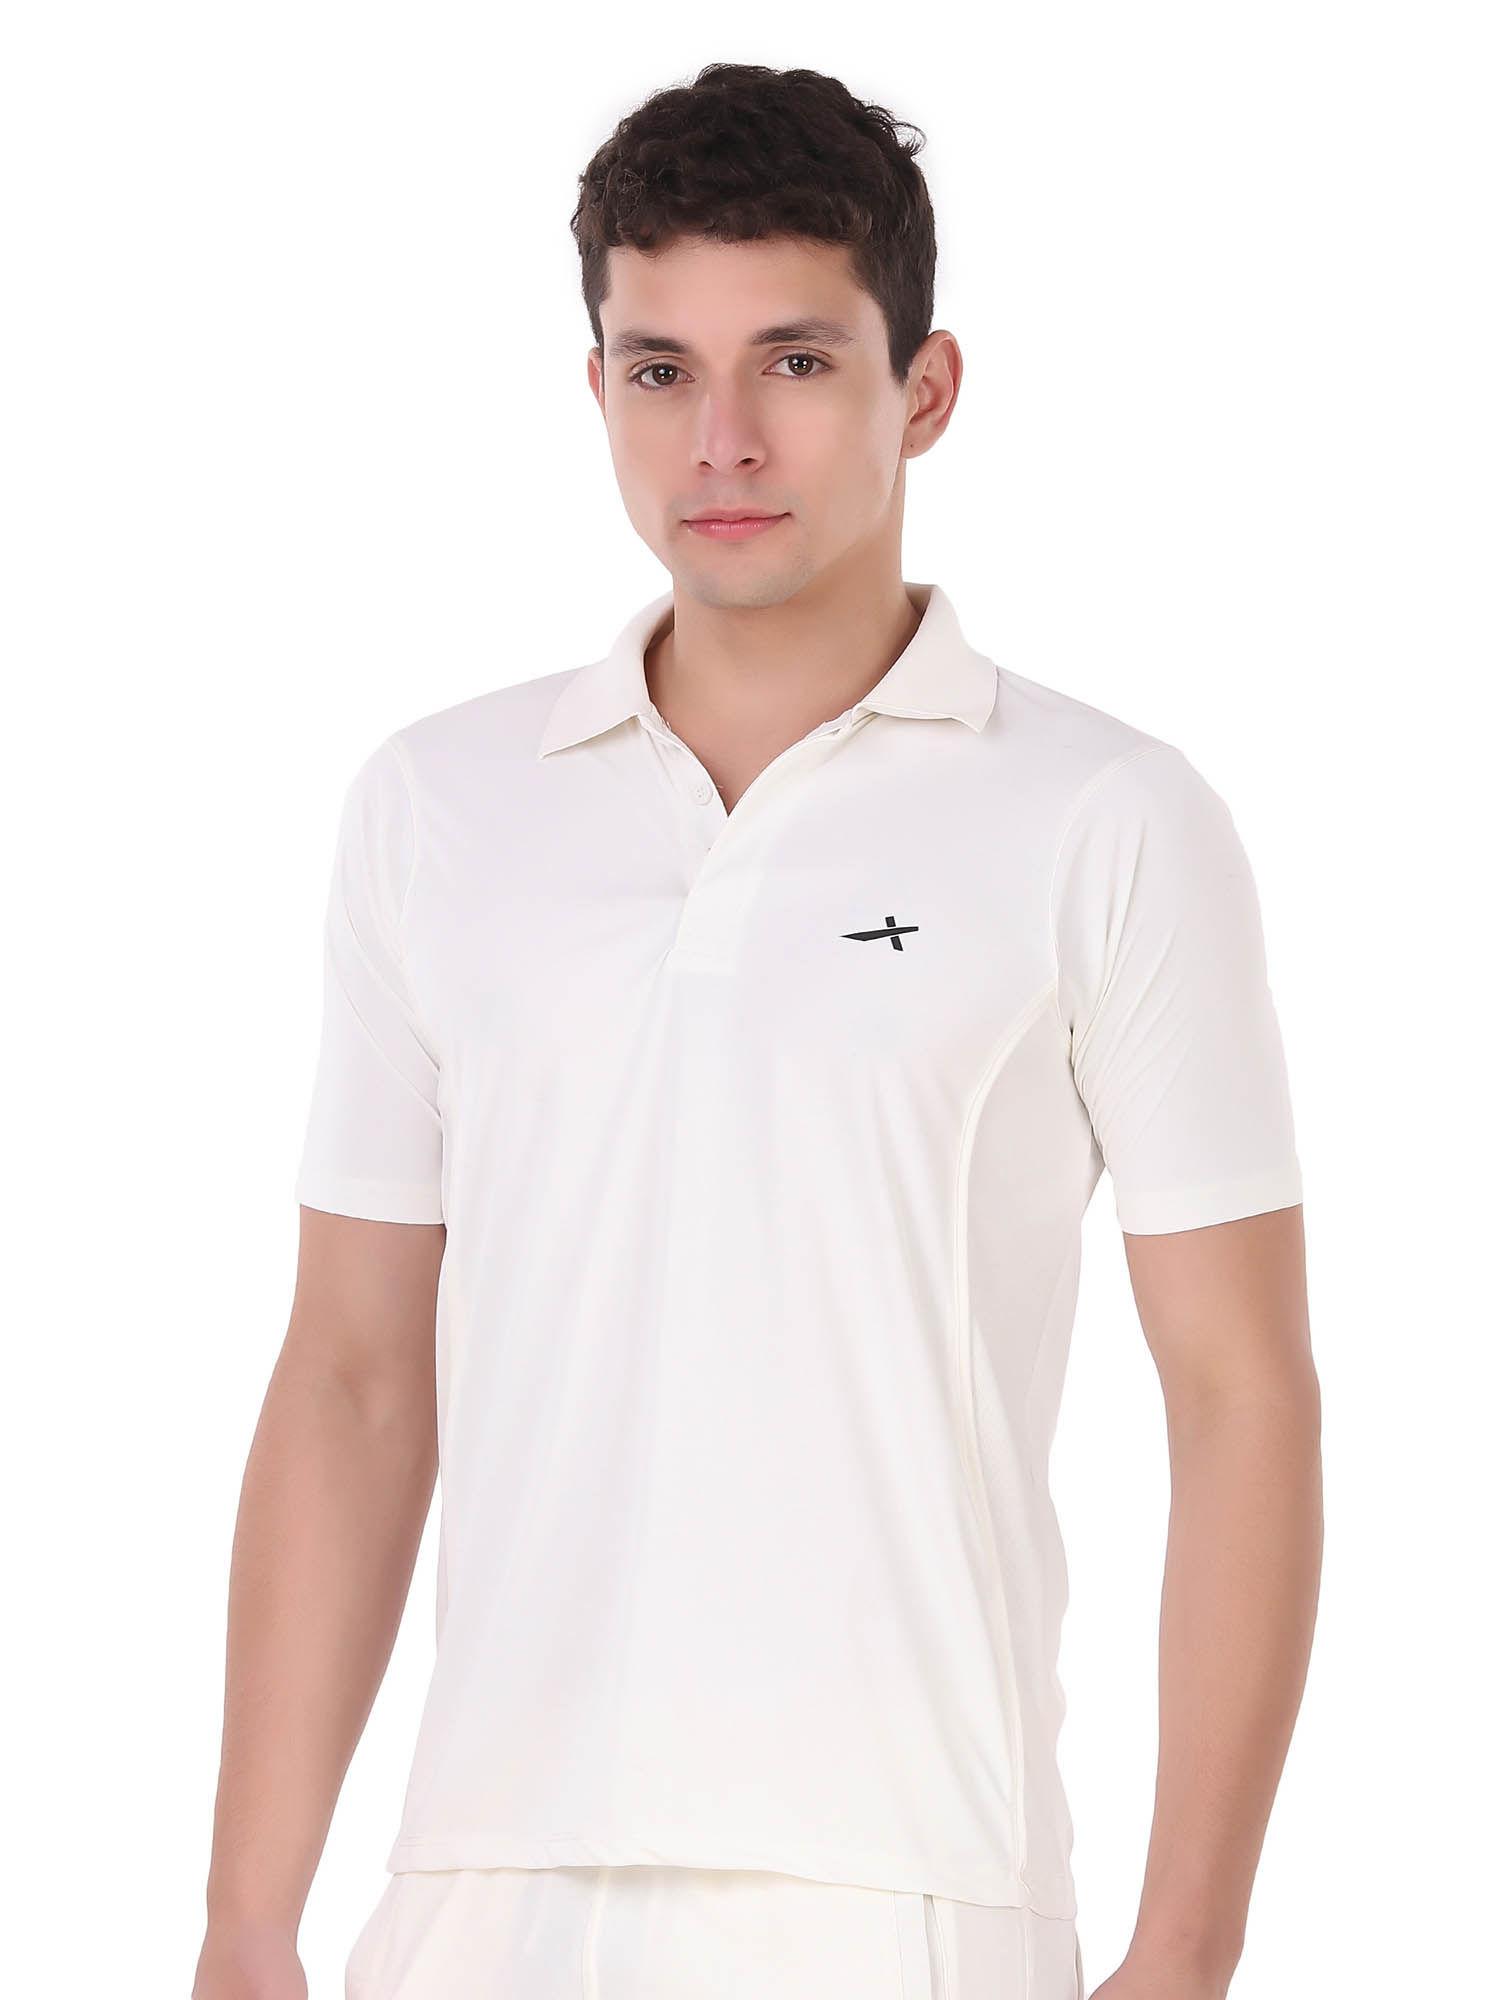 white cricket adult half sleeves polo t-shirt - white